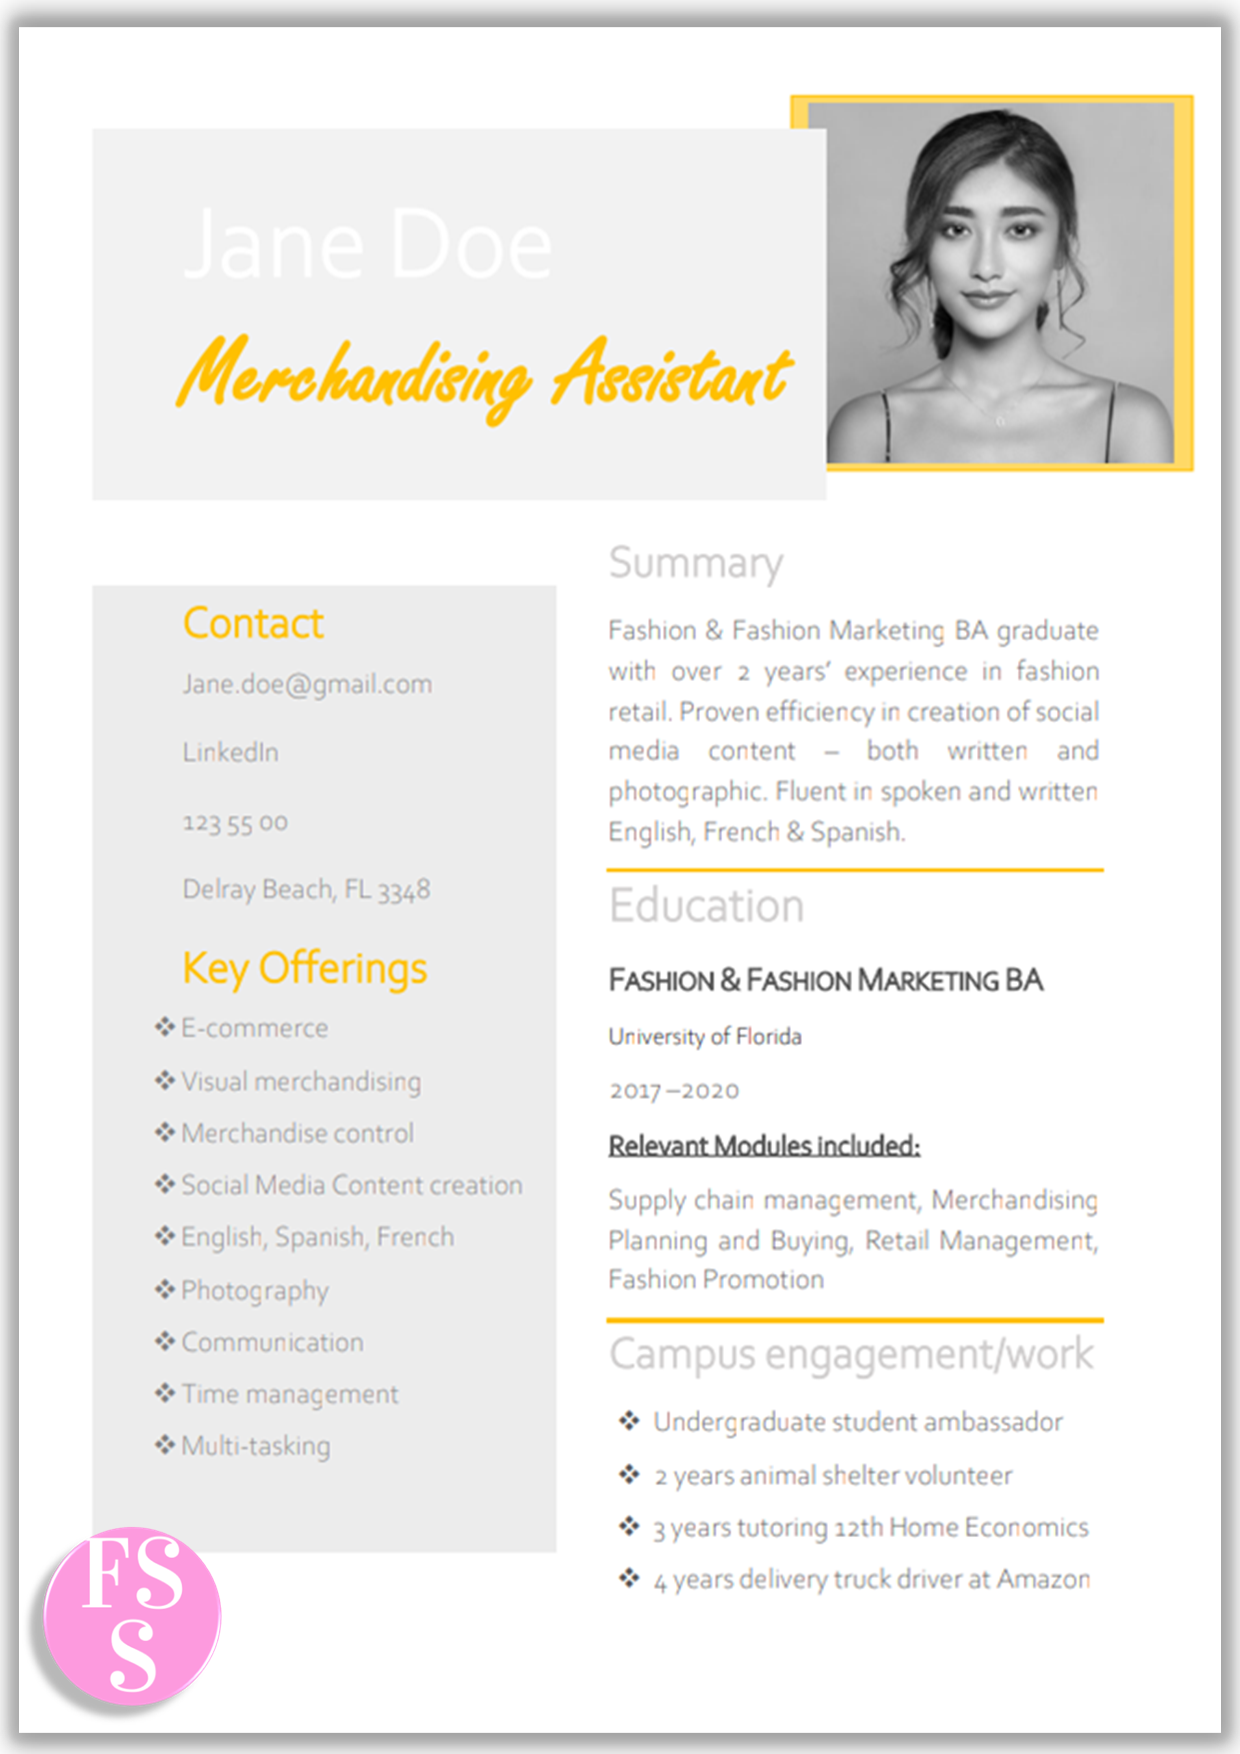 Entry Level Fashion Merchandising Resume: Template + Matching Cover Letter… Use our creative resume design carefully crafted to get you hired now!